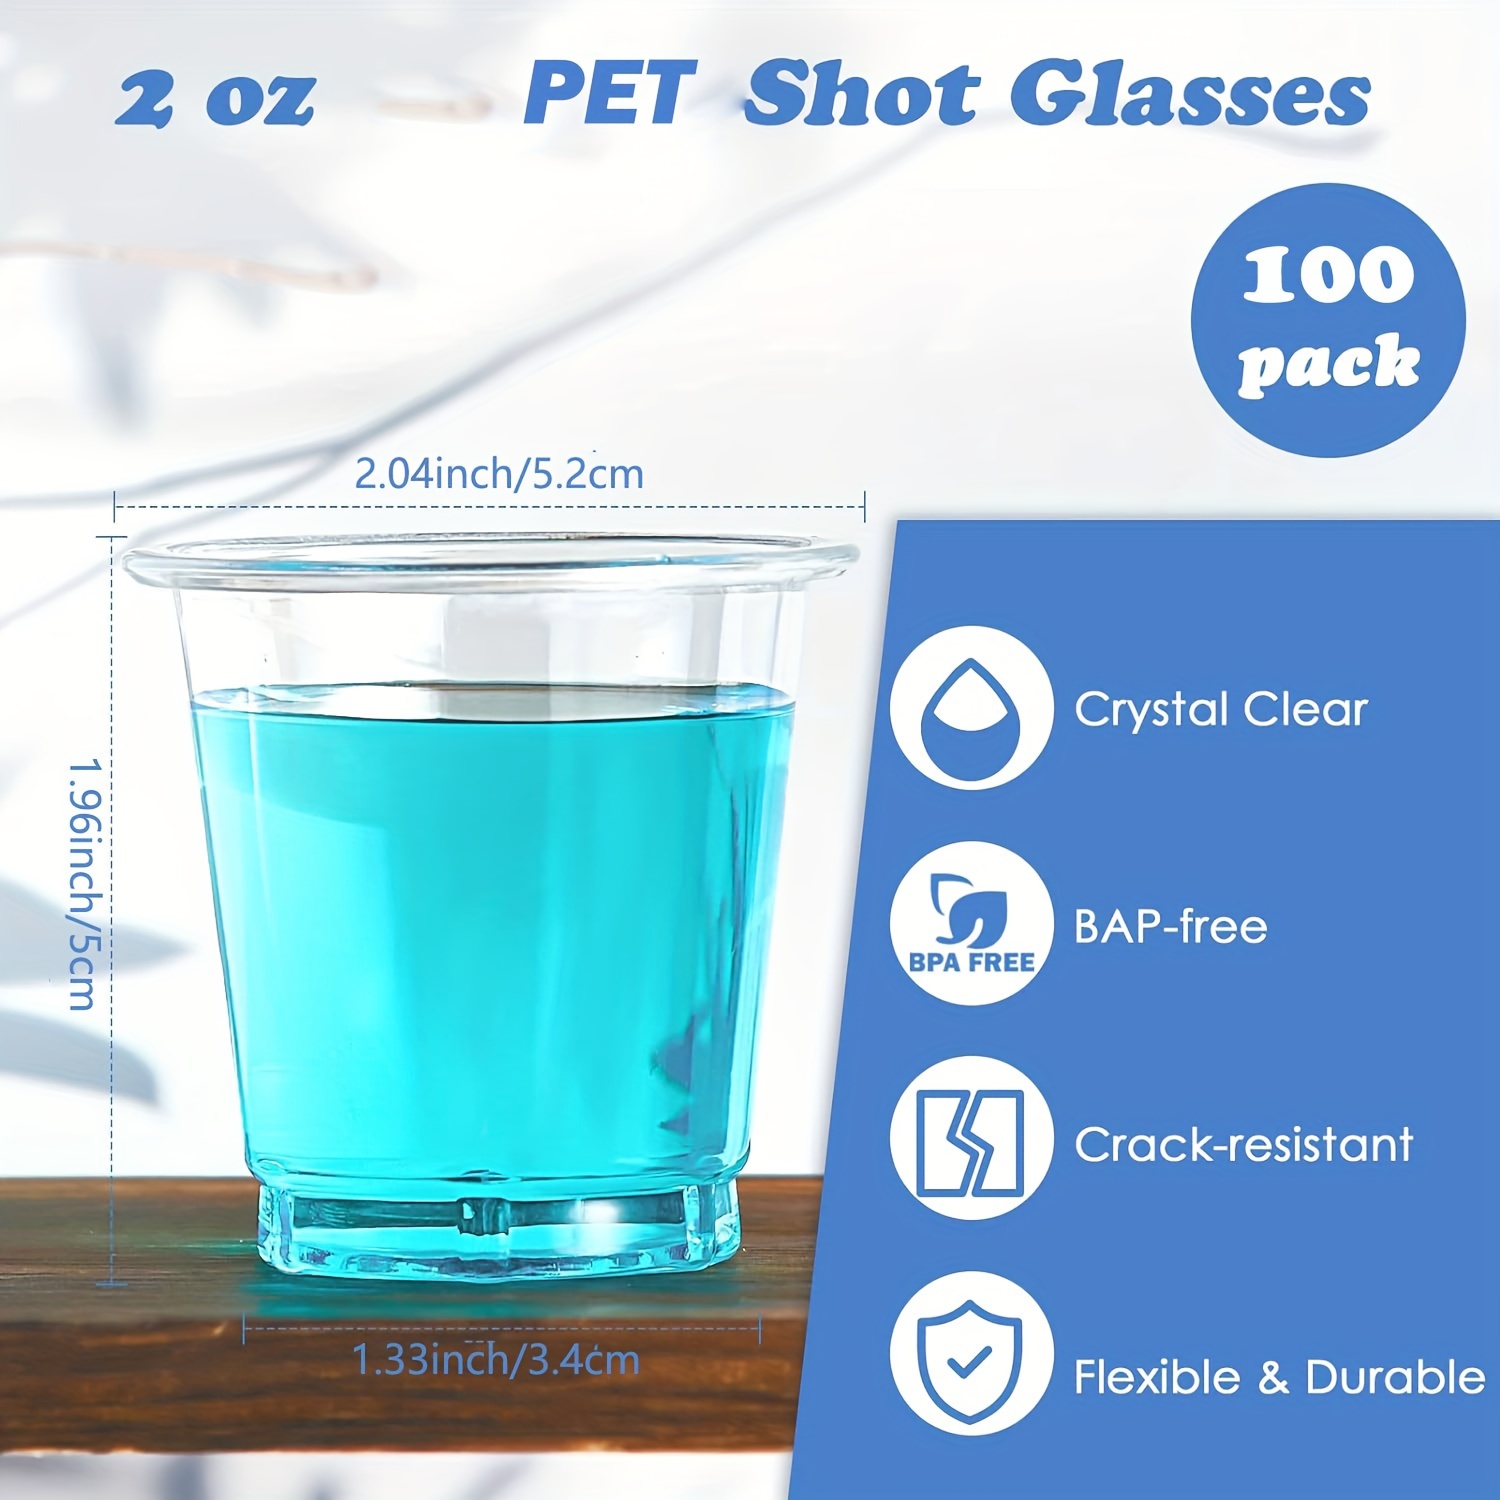 1000 Plastic Shot Glasses - 1 Oz Disposable Cups - 1 Ounce Shot Glasses -  Small Party Cups Ideal for Whiskey, Wine Tasting, Food Samples, and